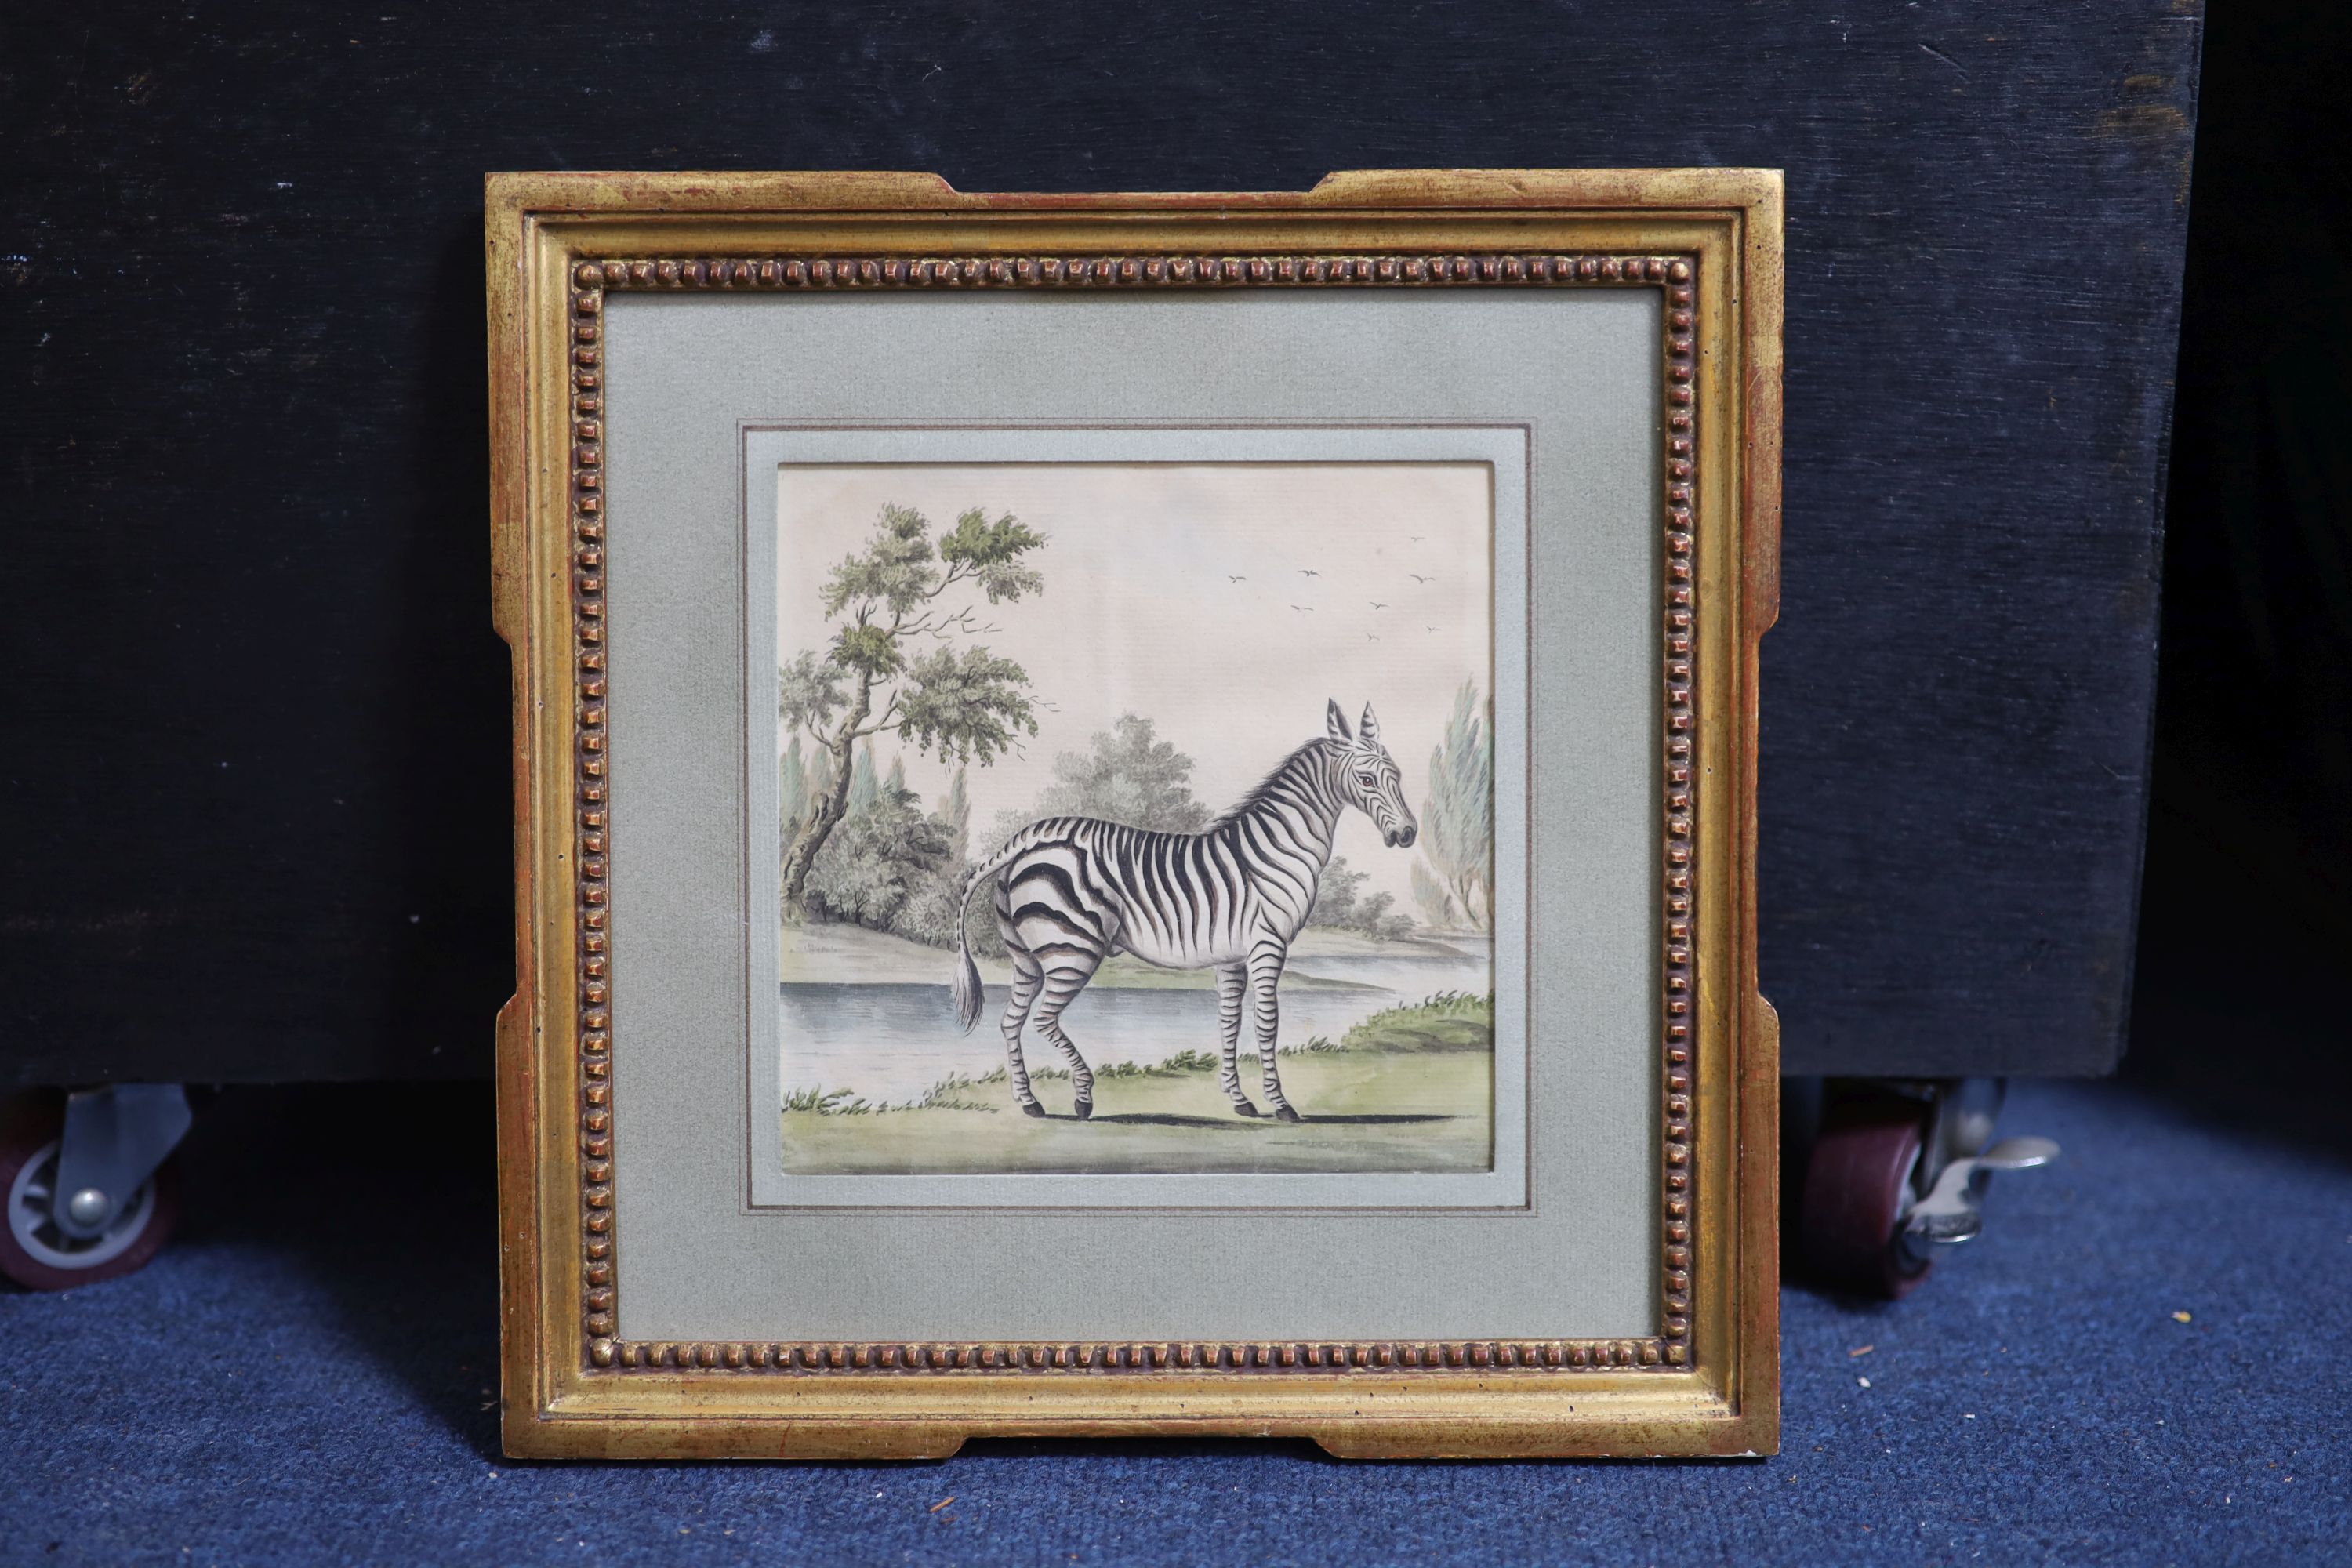 English School c.1780 , Zebra in a South African landscape, watercolour on paper, 15 x 15cm